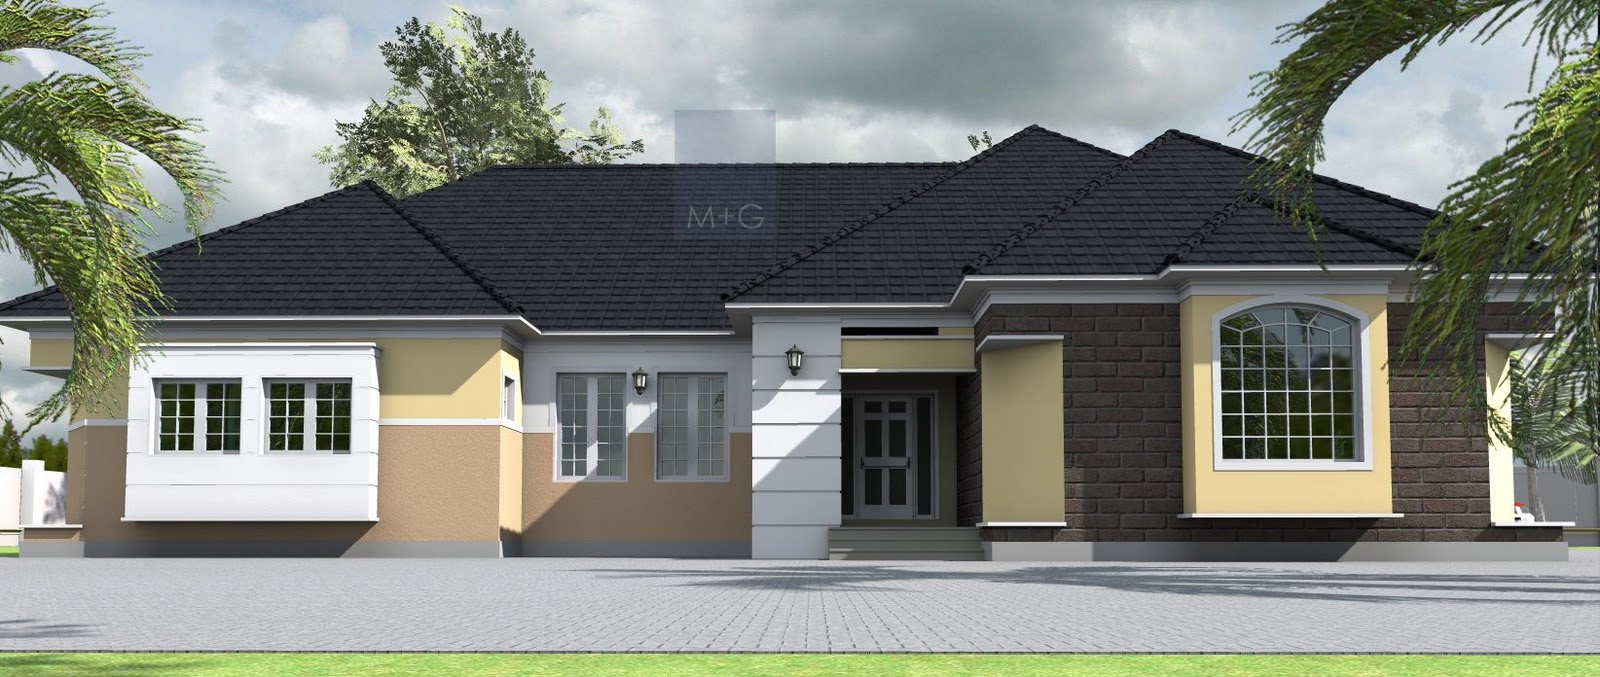 Contemporary Nigerian Residential Architecture 4 Bedroom Bungalow